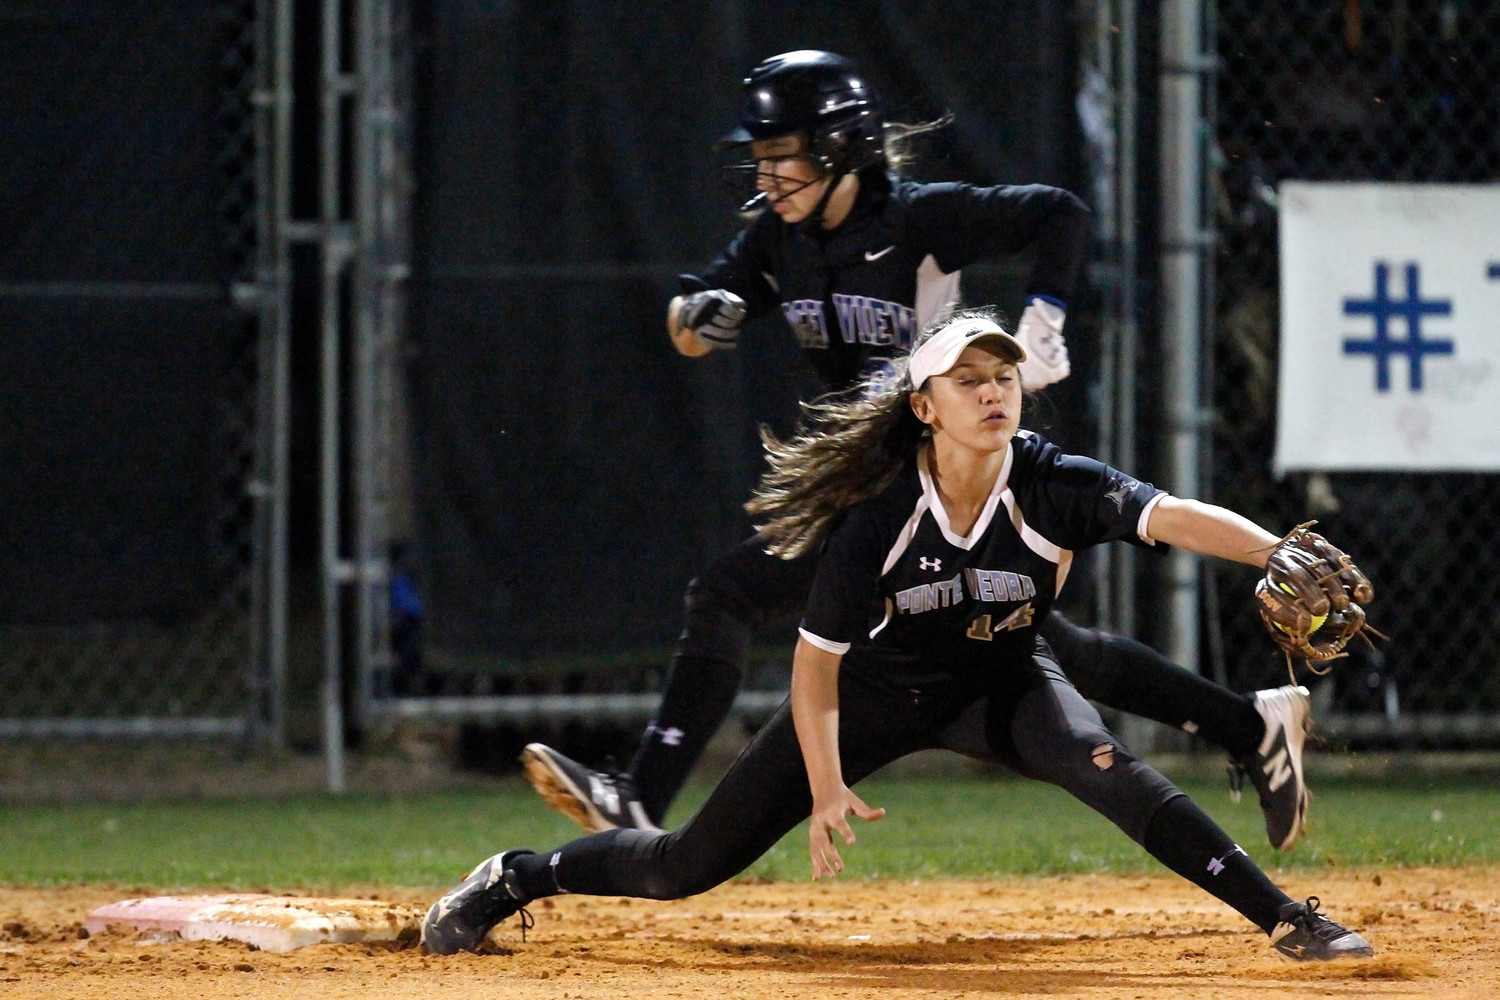 Ponte Vedra’s Catherine Beaton (14) stretches to get the Ridgeview runner out at first base.